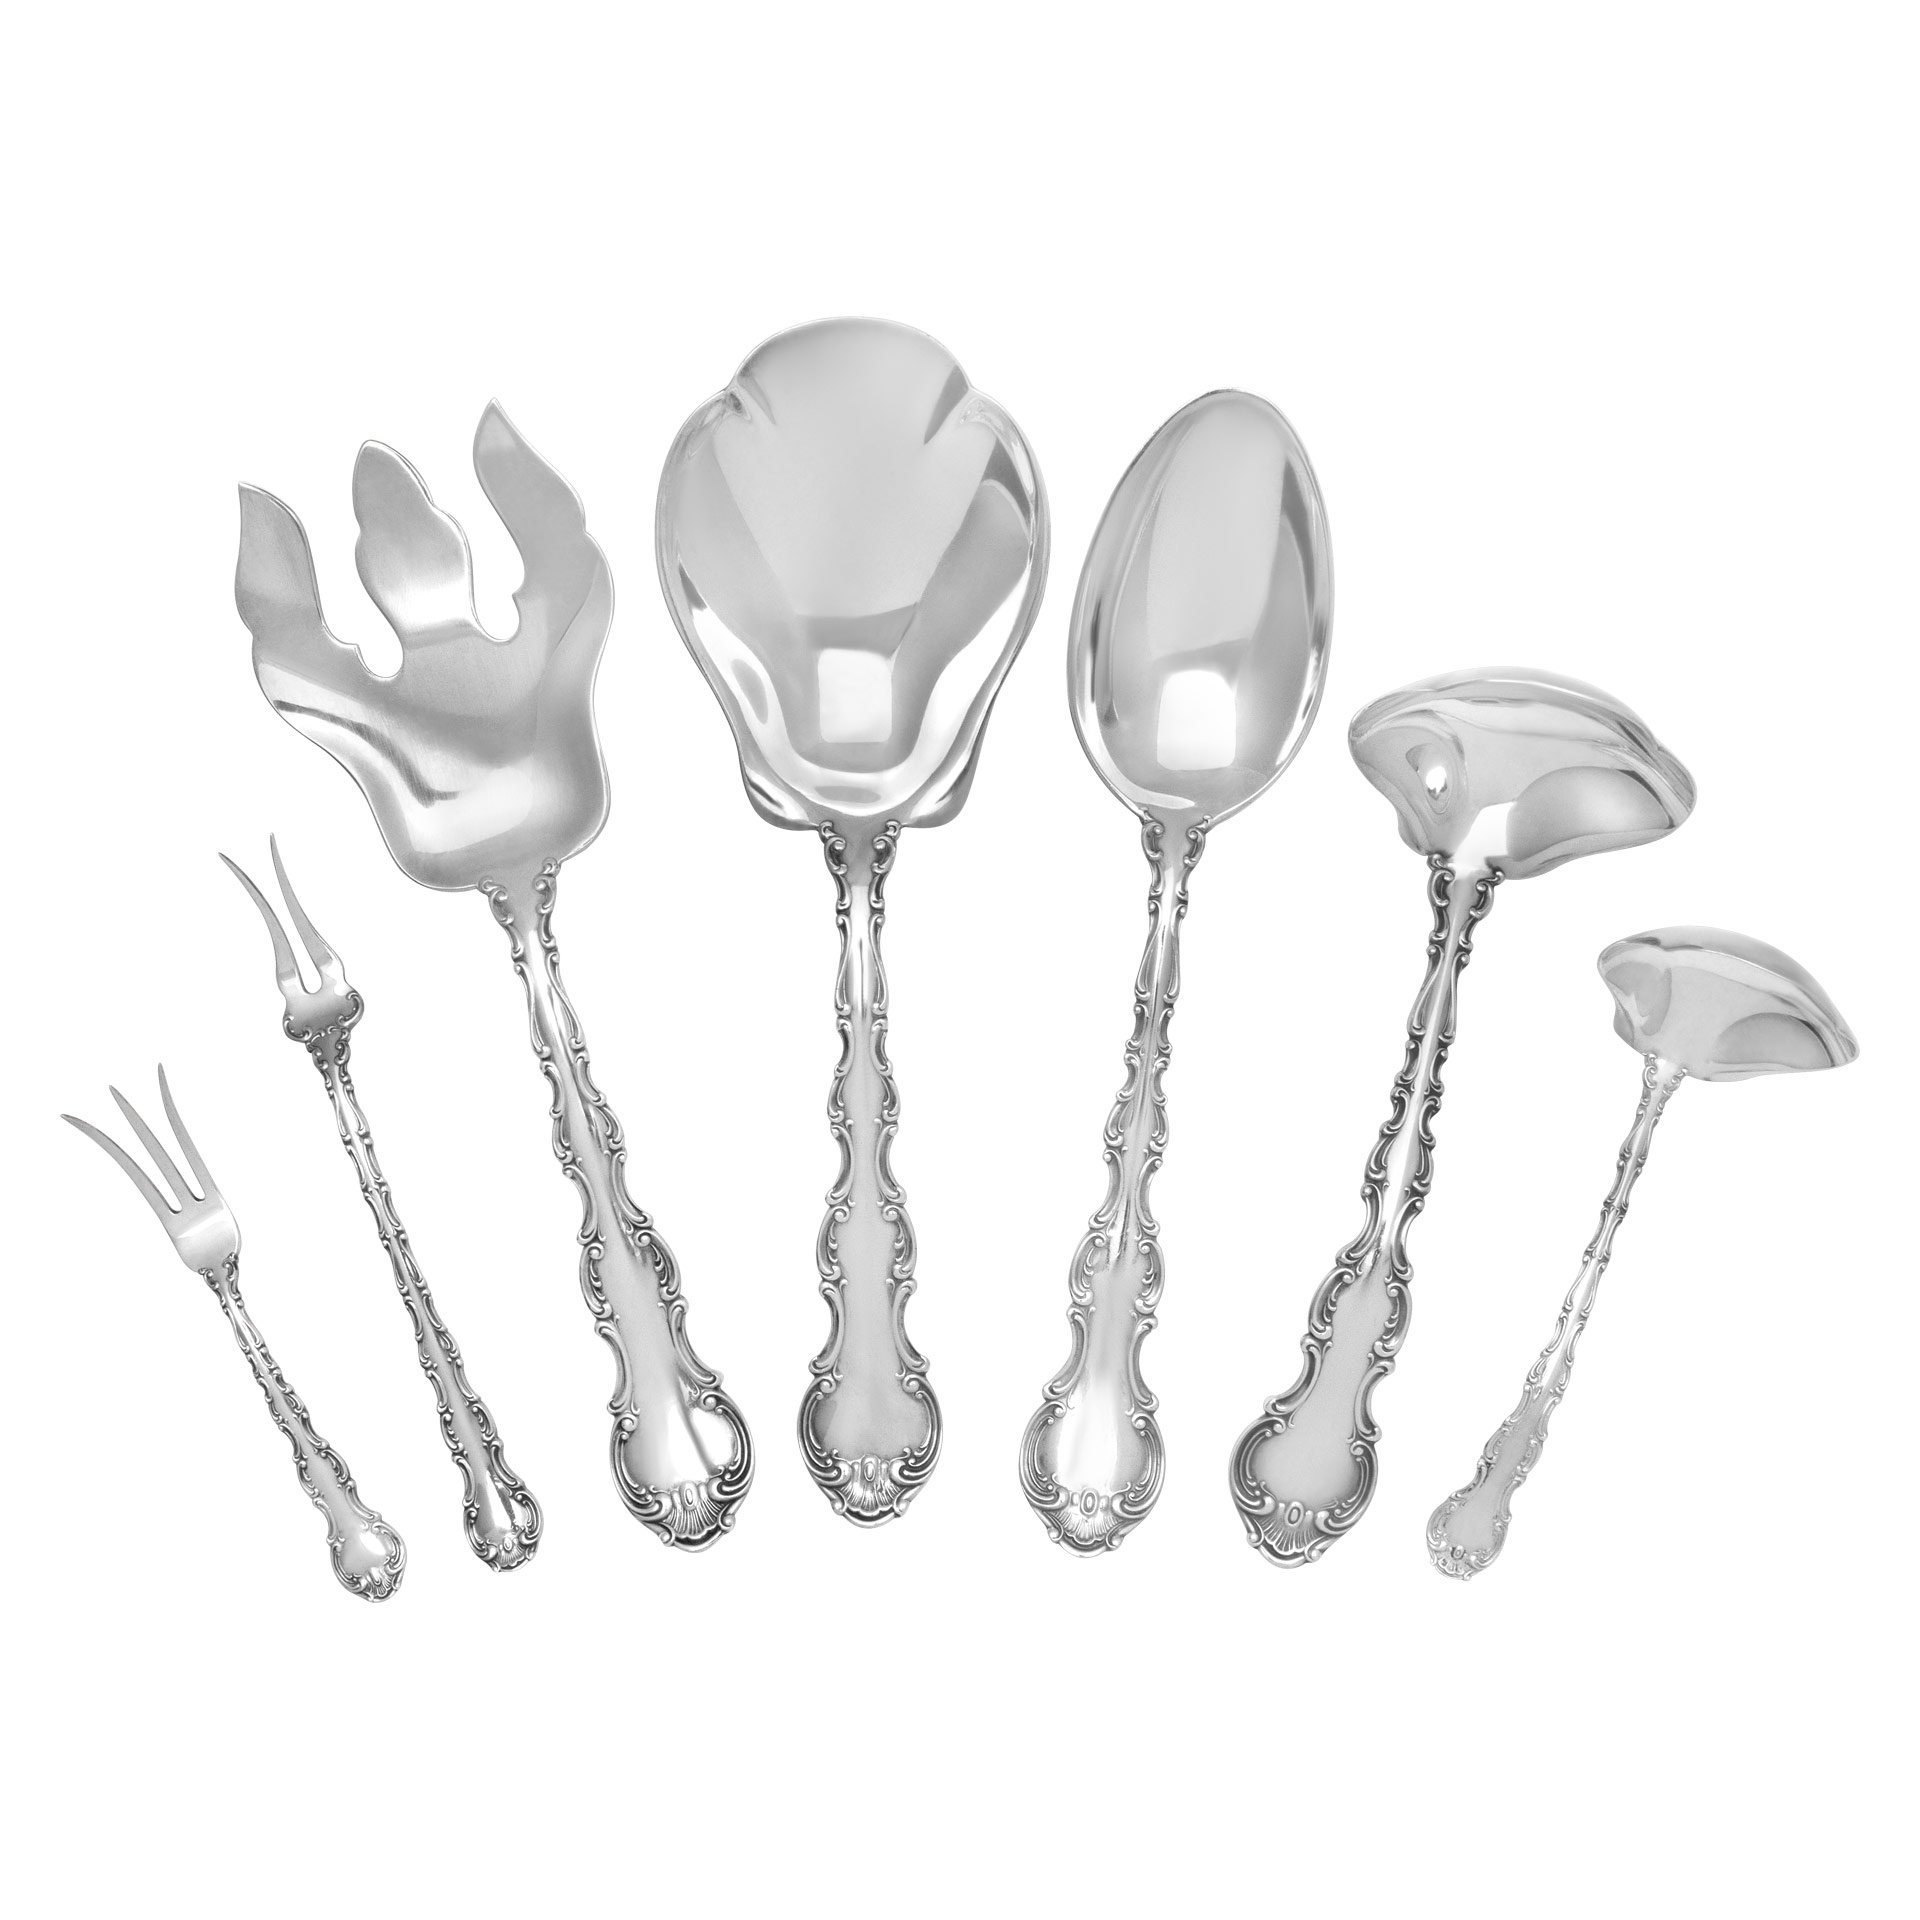 SUPER SIZED "Strasbourg" Sterling Silver Flatware set patented by Gorham in  1897-  8 Place setting for 12 (plus) with 18 serving pieces- Over 3300 grams sterling silver. image 5